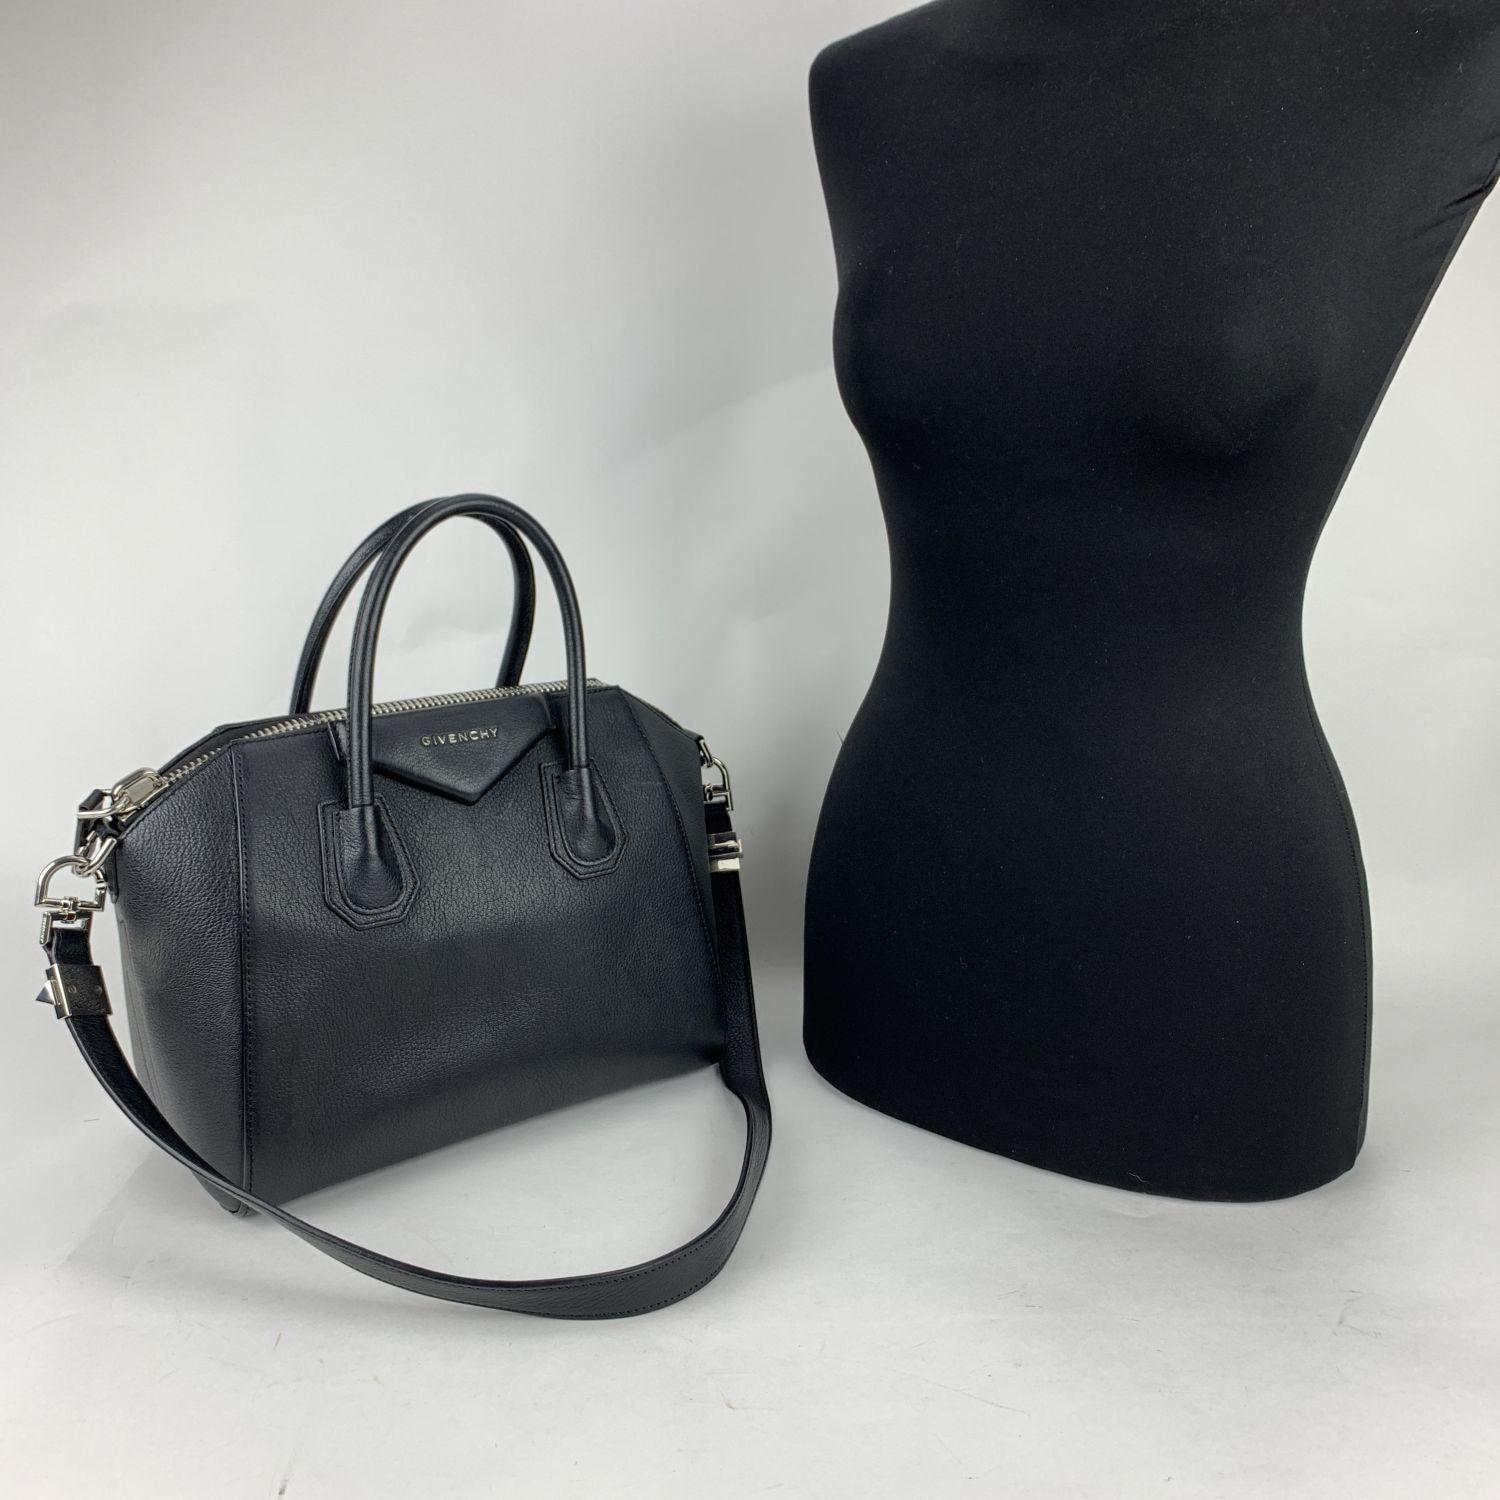 Beautiful black leather GIVENCHY Small 'Antigona' bag. It features envelope flap detail with logo lettering, silver metal hardware, upper zipper closure, structured base, double handles and a removable shoulder strap. Lined with black textile